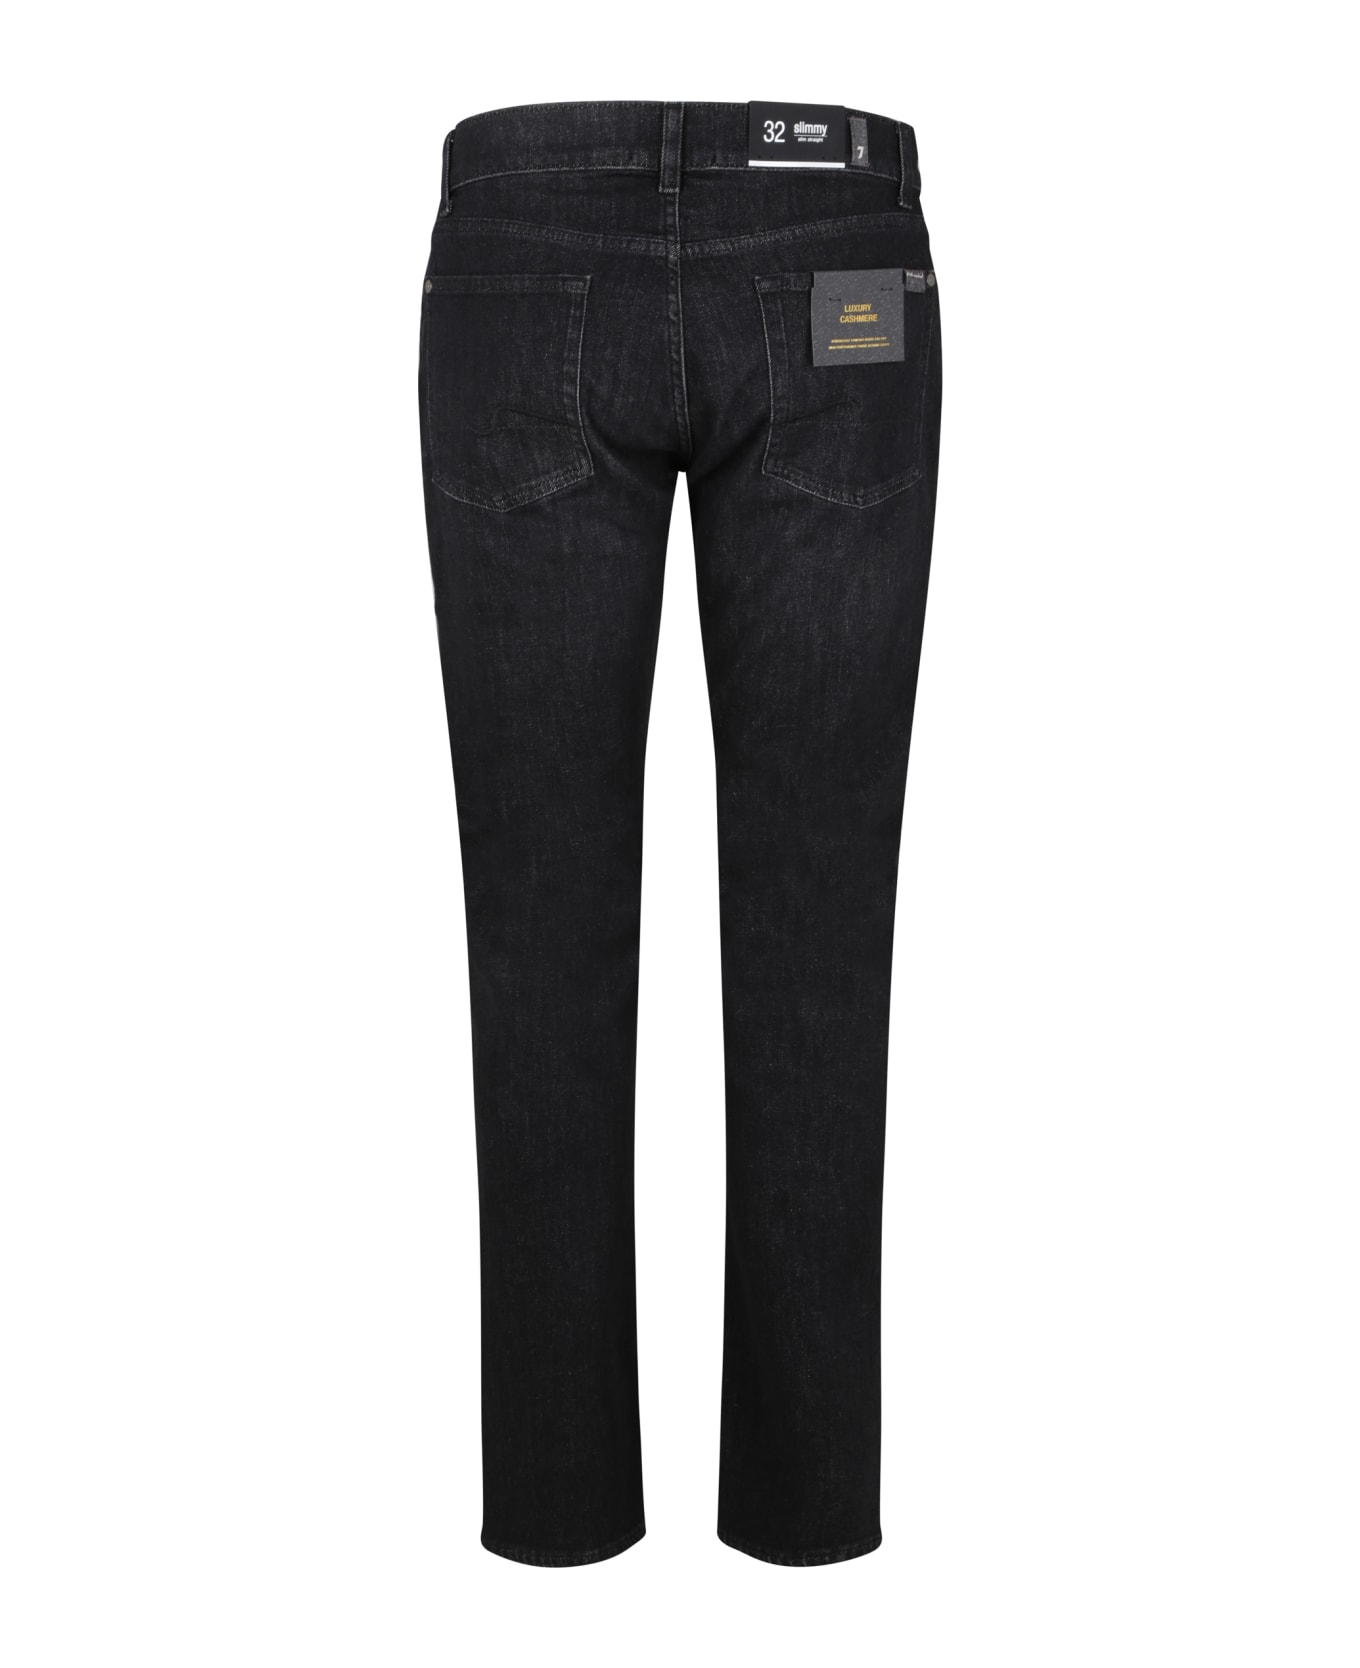 7 For All Mankind Slimmy Jeans - Black